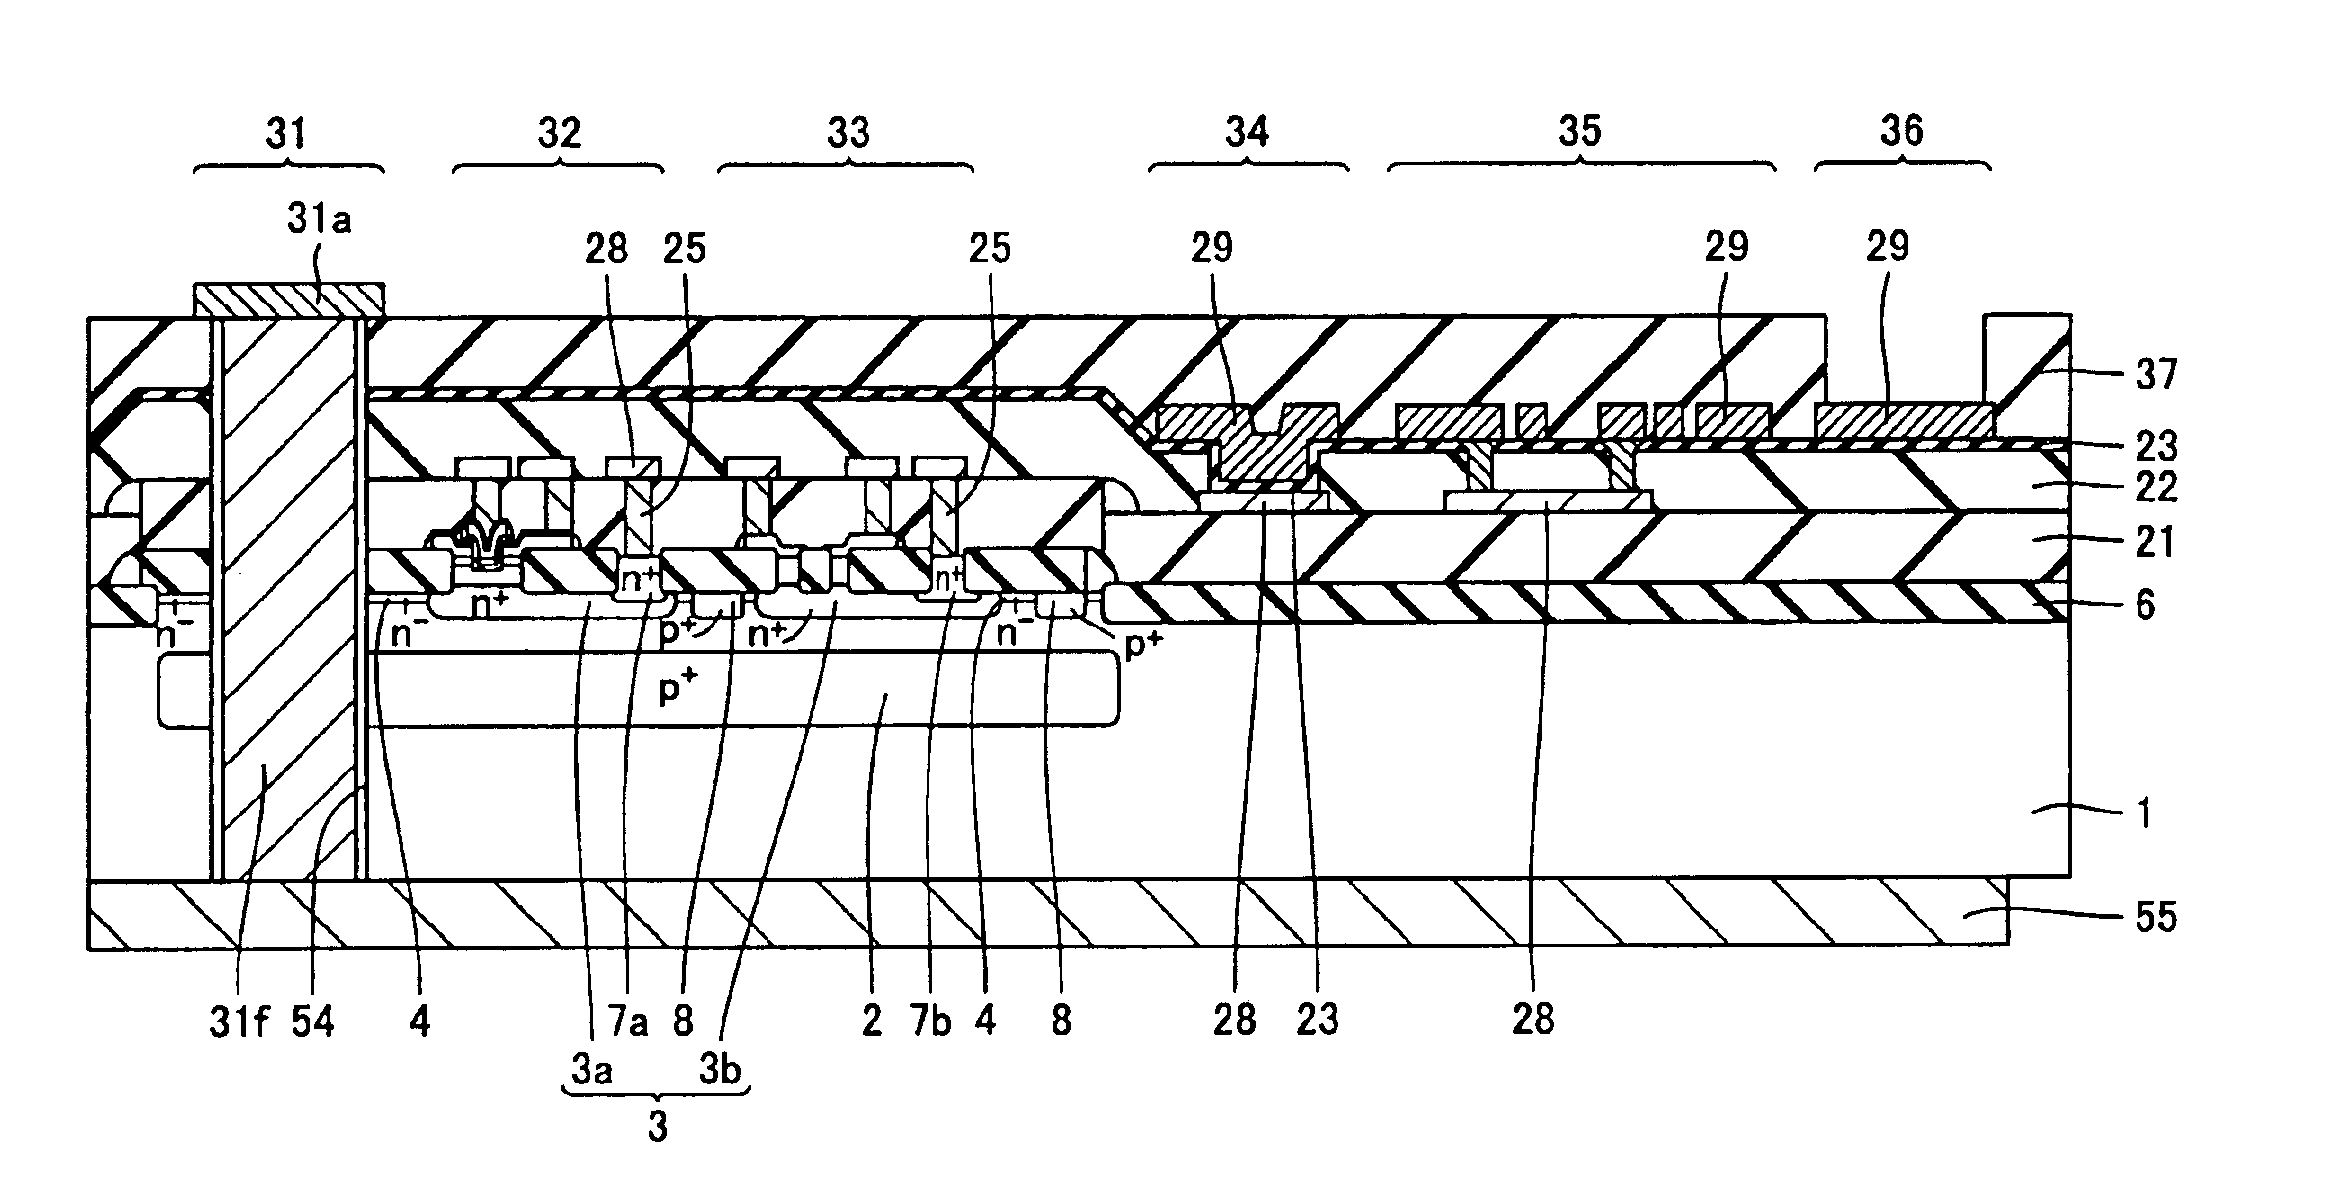 Semiconductor device including bipolar transistor and buried conductive region